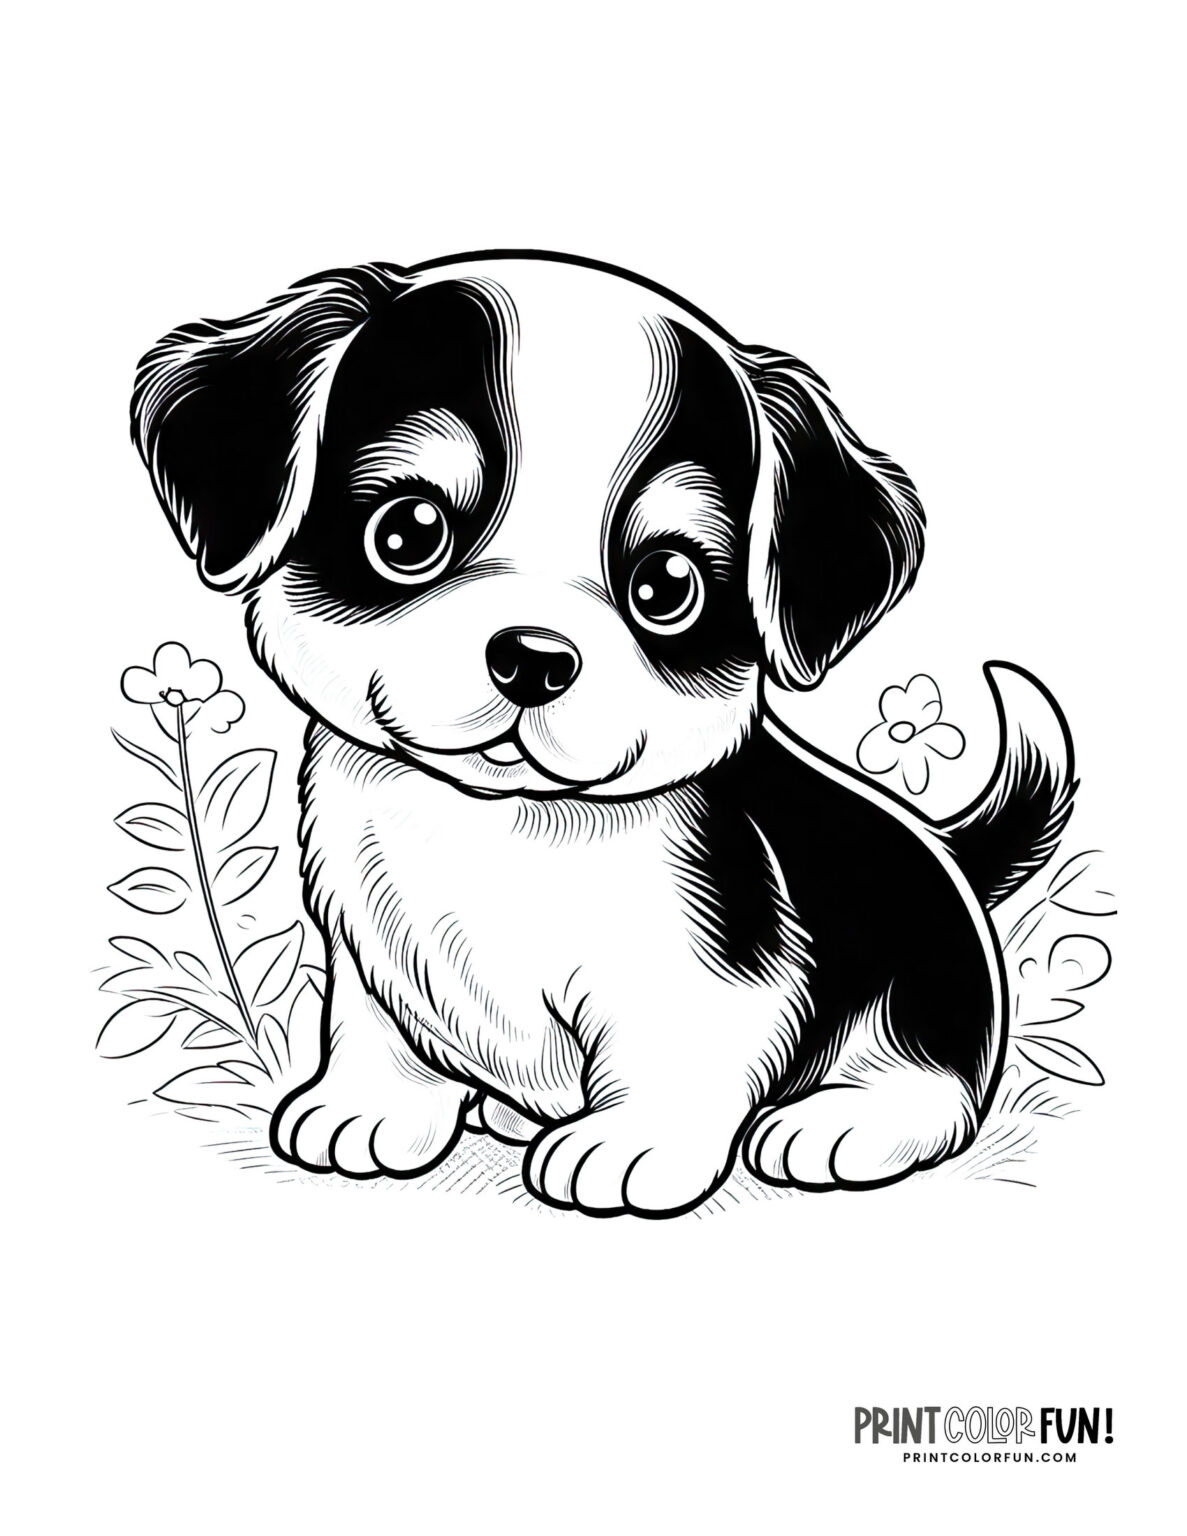 31 cute puppy coloring pages & free color clipart, at PrintColorFun.com